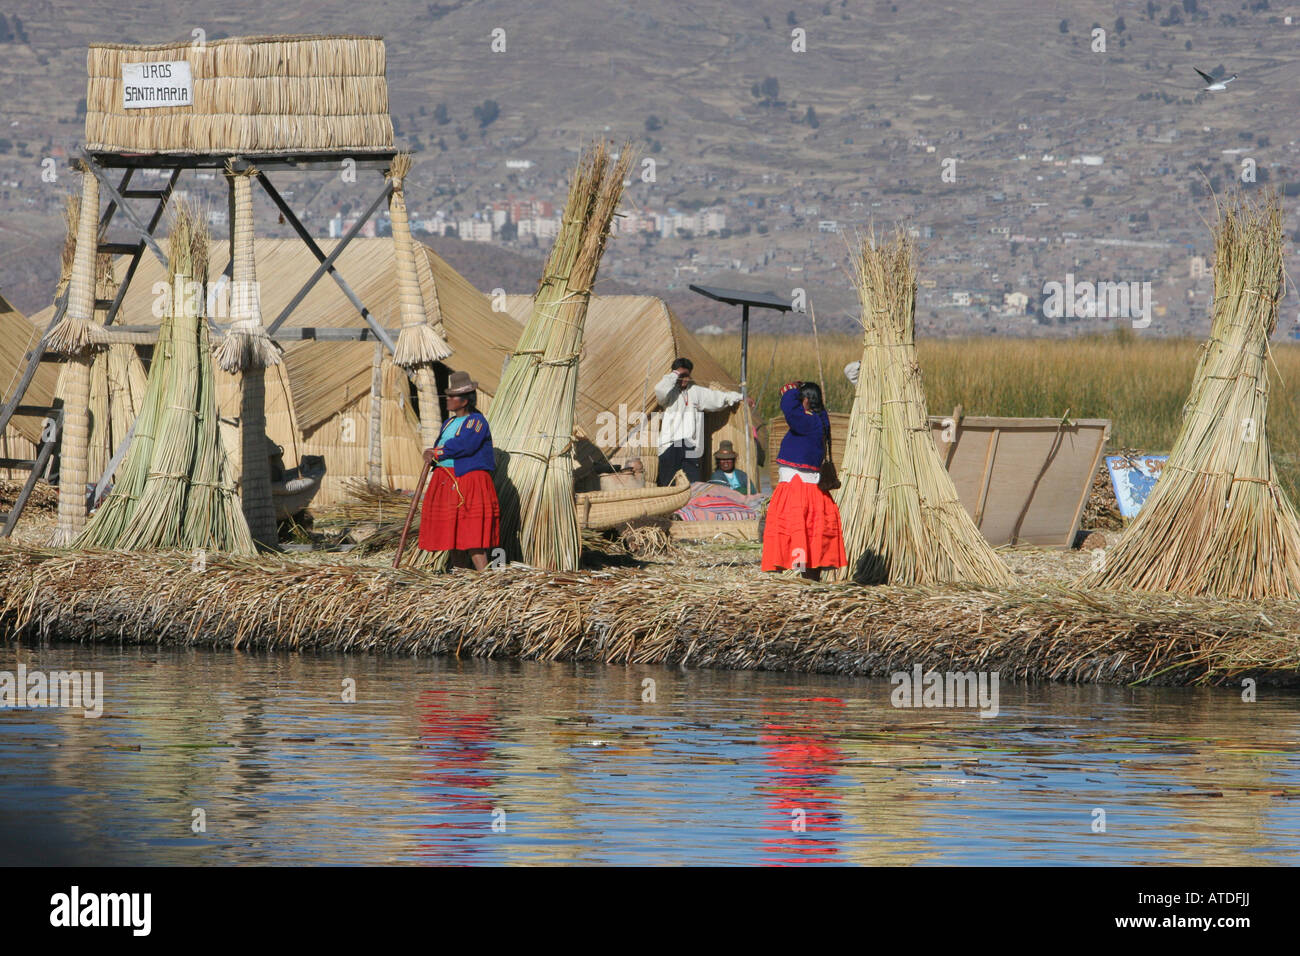 An Uros village comprised of a floating island made of reeds on Lake Titicaca Peru Stock Photo